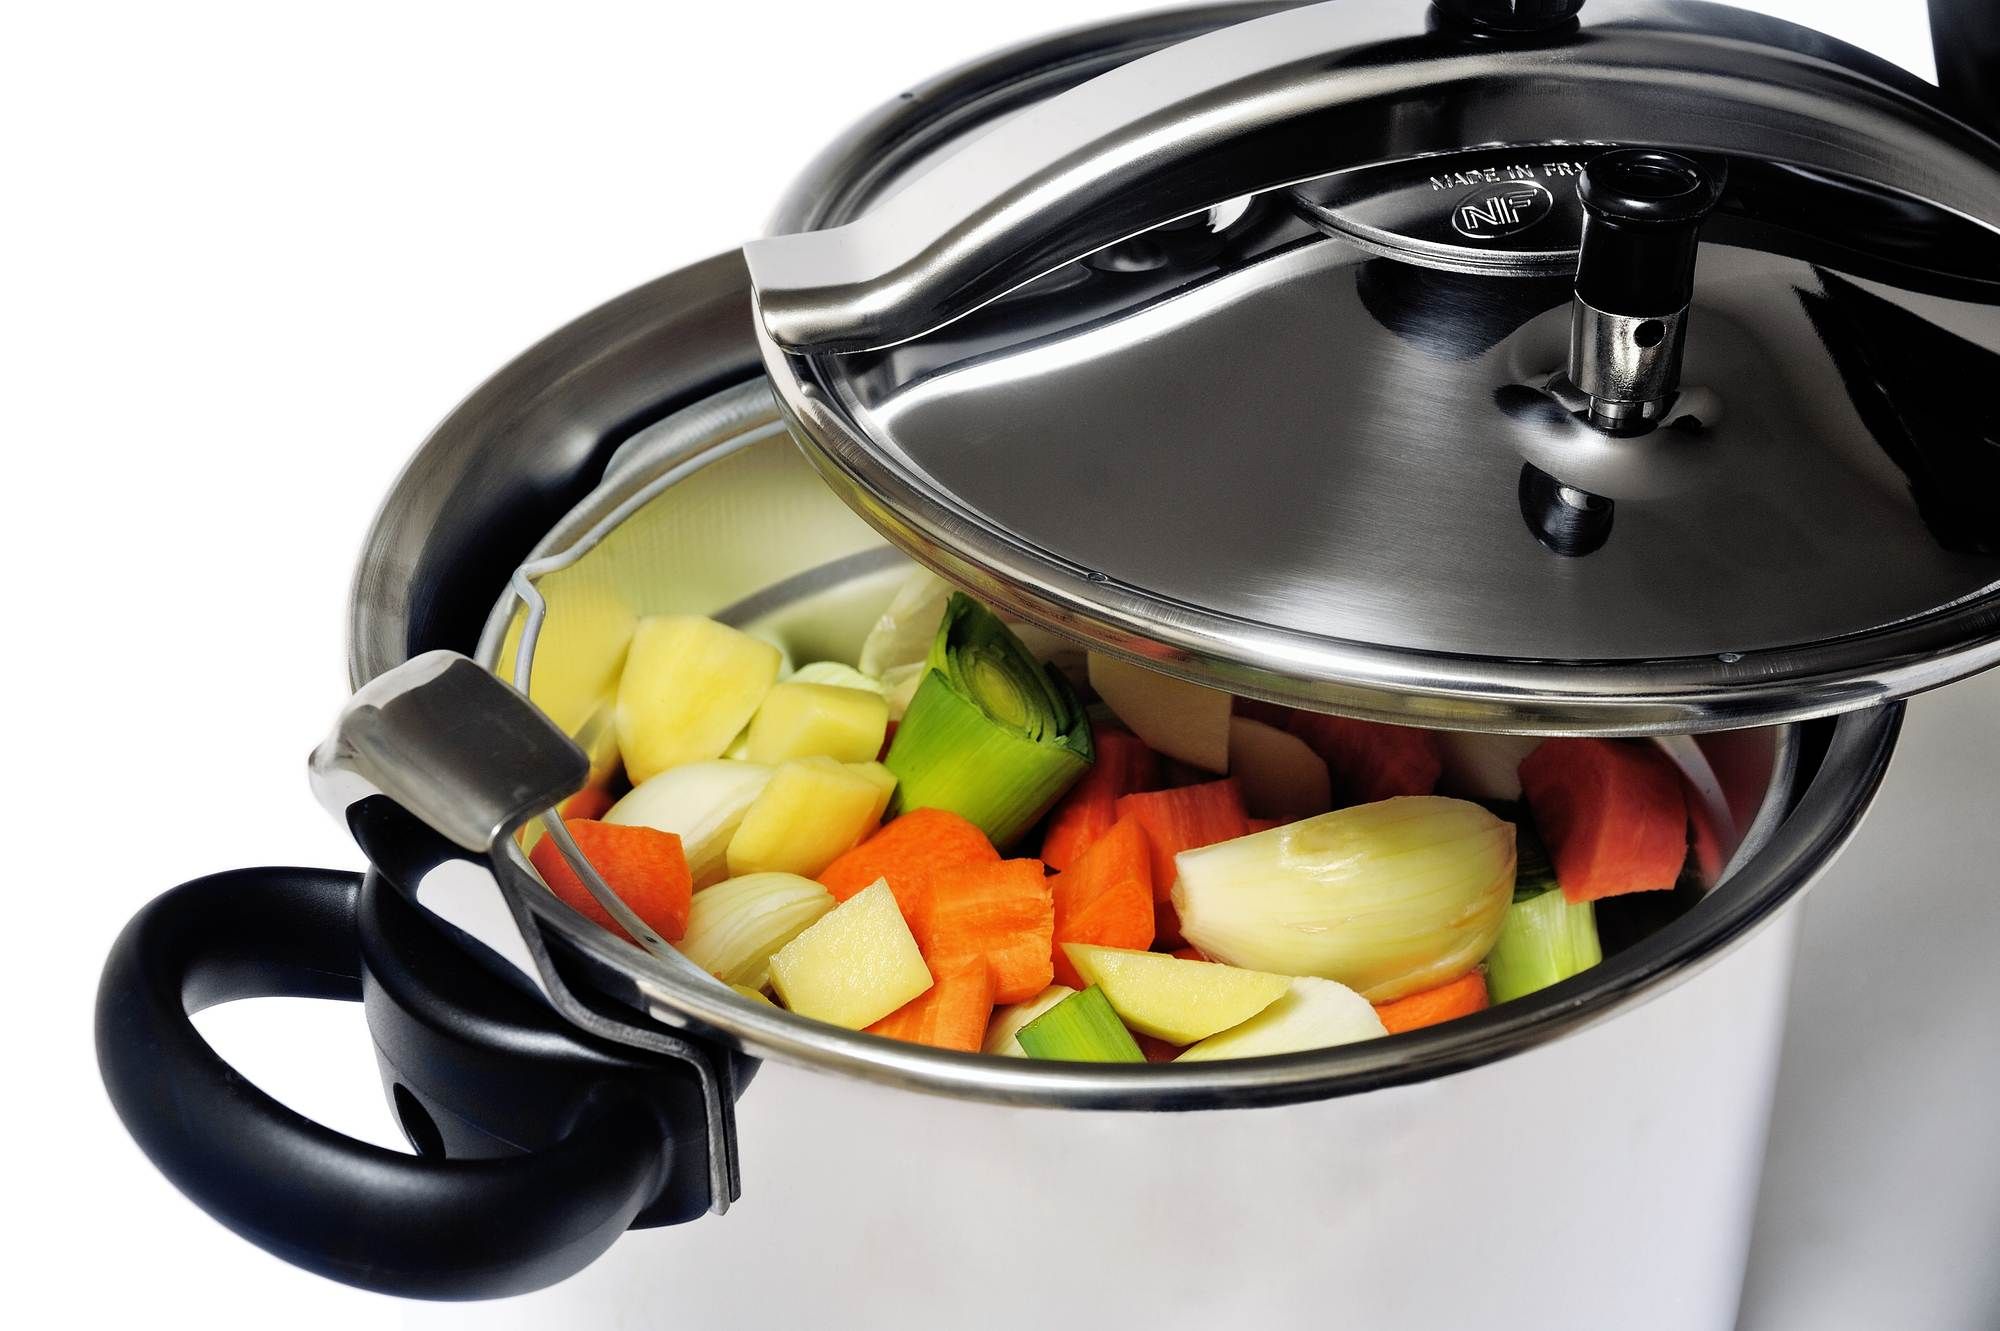 What are the problems with the Sunbeam crock-pot recall?